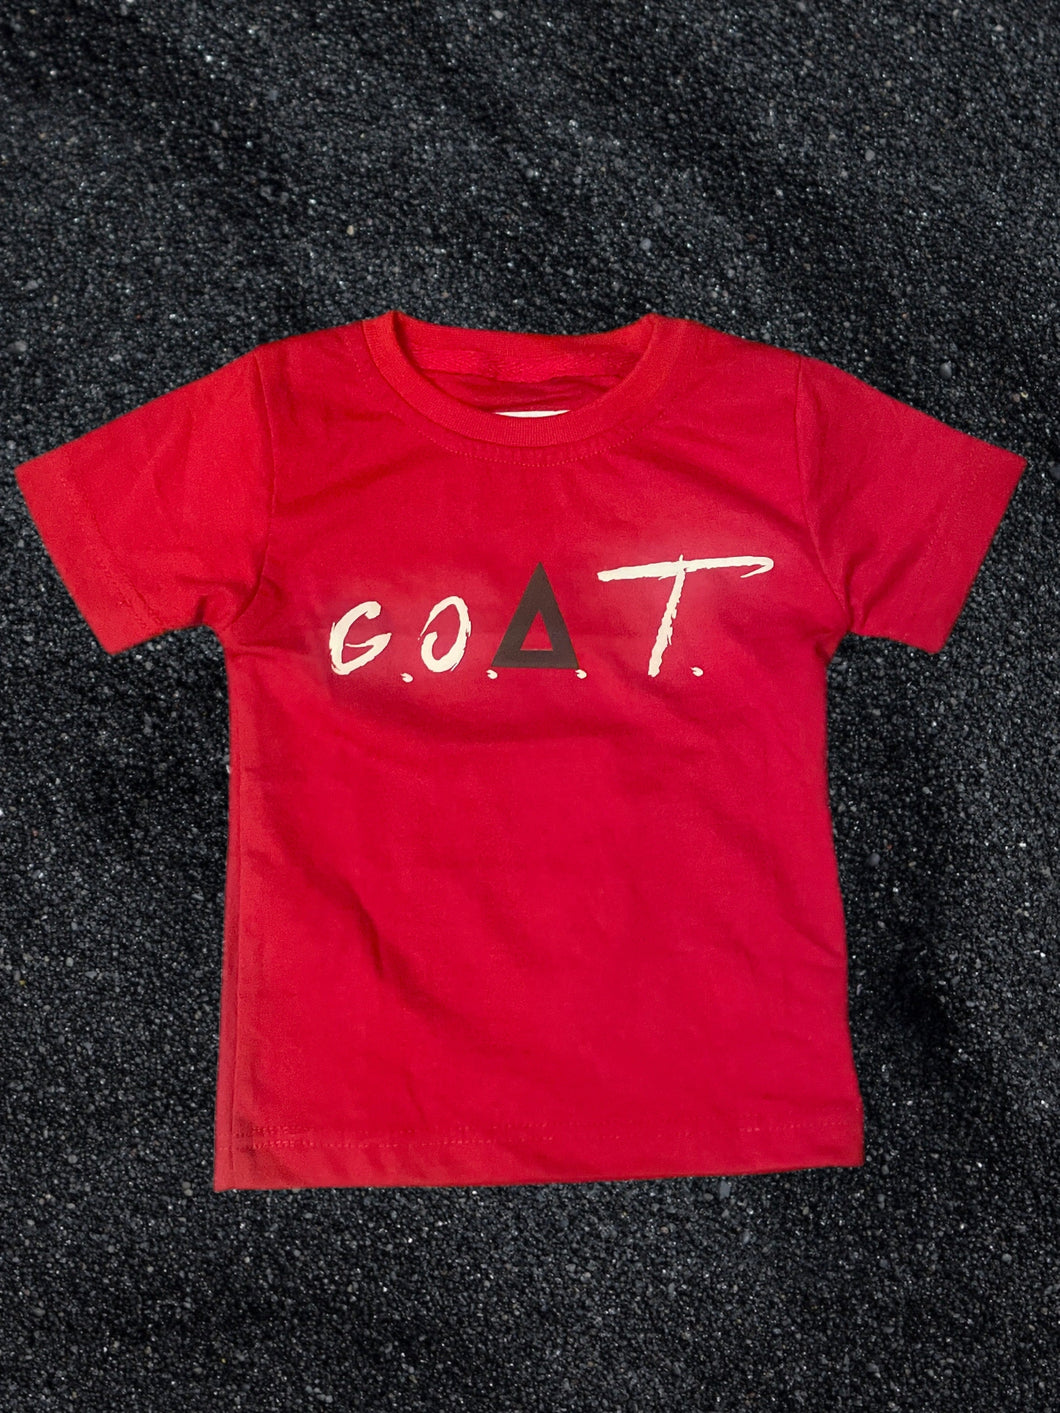 Youth Red Serious G.O.A.T. Tee